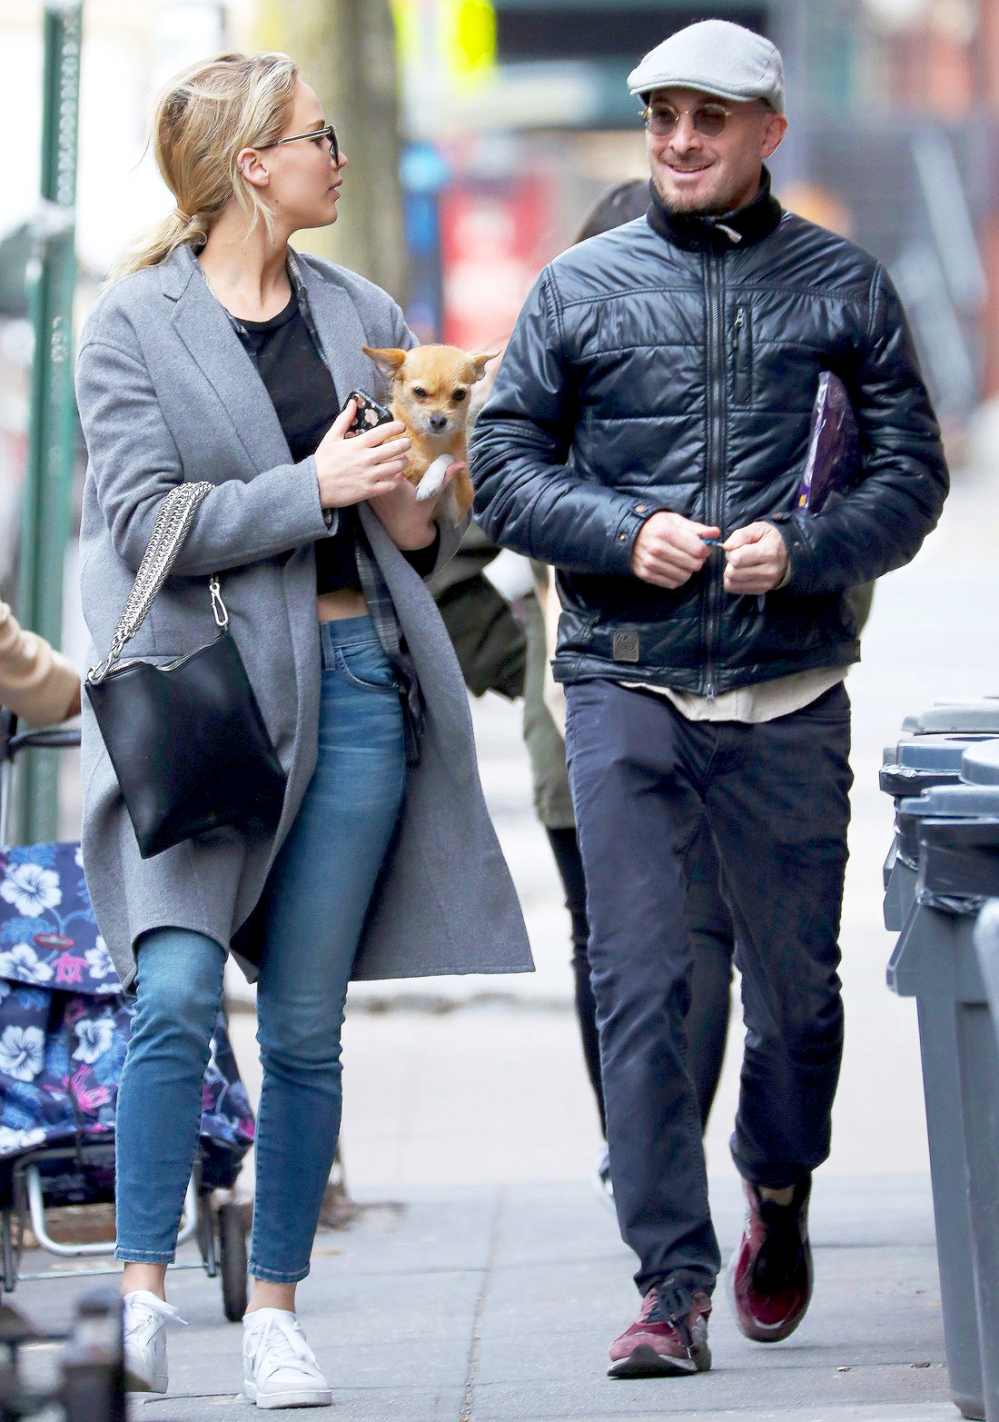 Jennifer Lawrence and Darren Aronofsky spotted together in New York City on December 20, 2017.